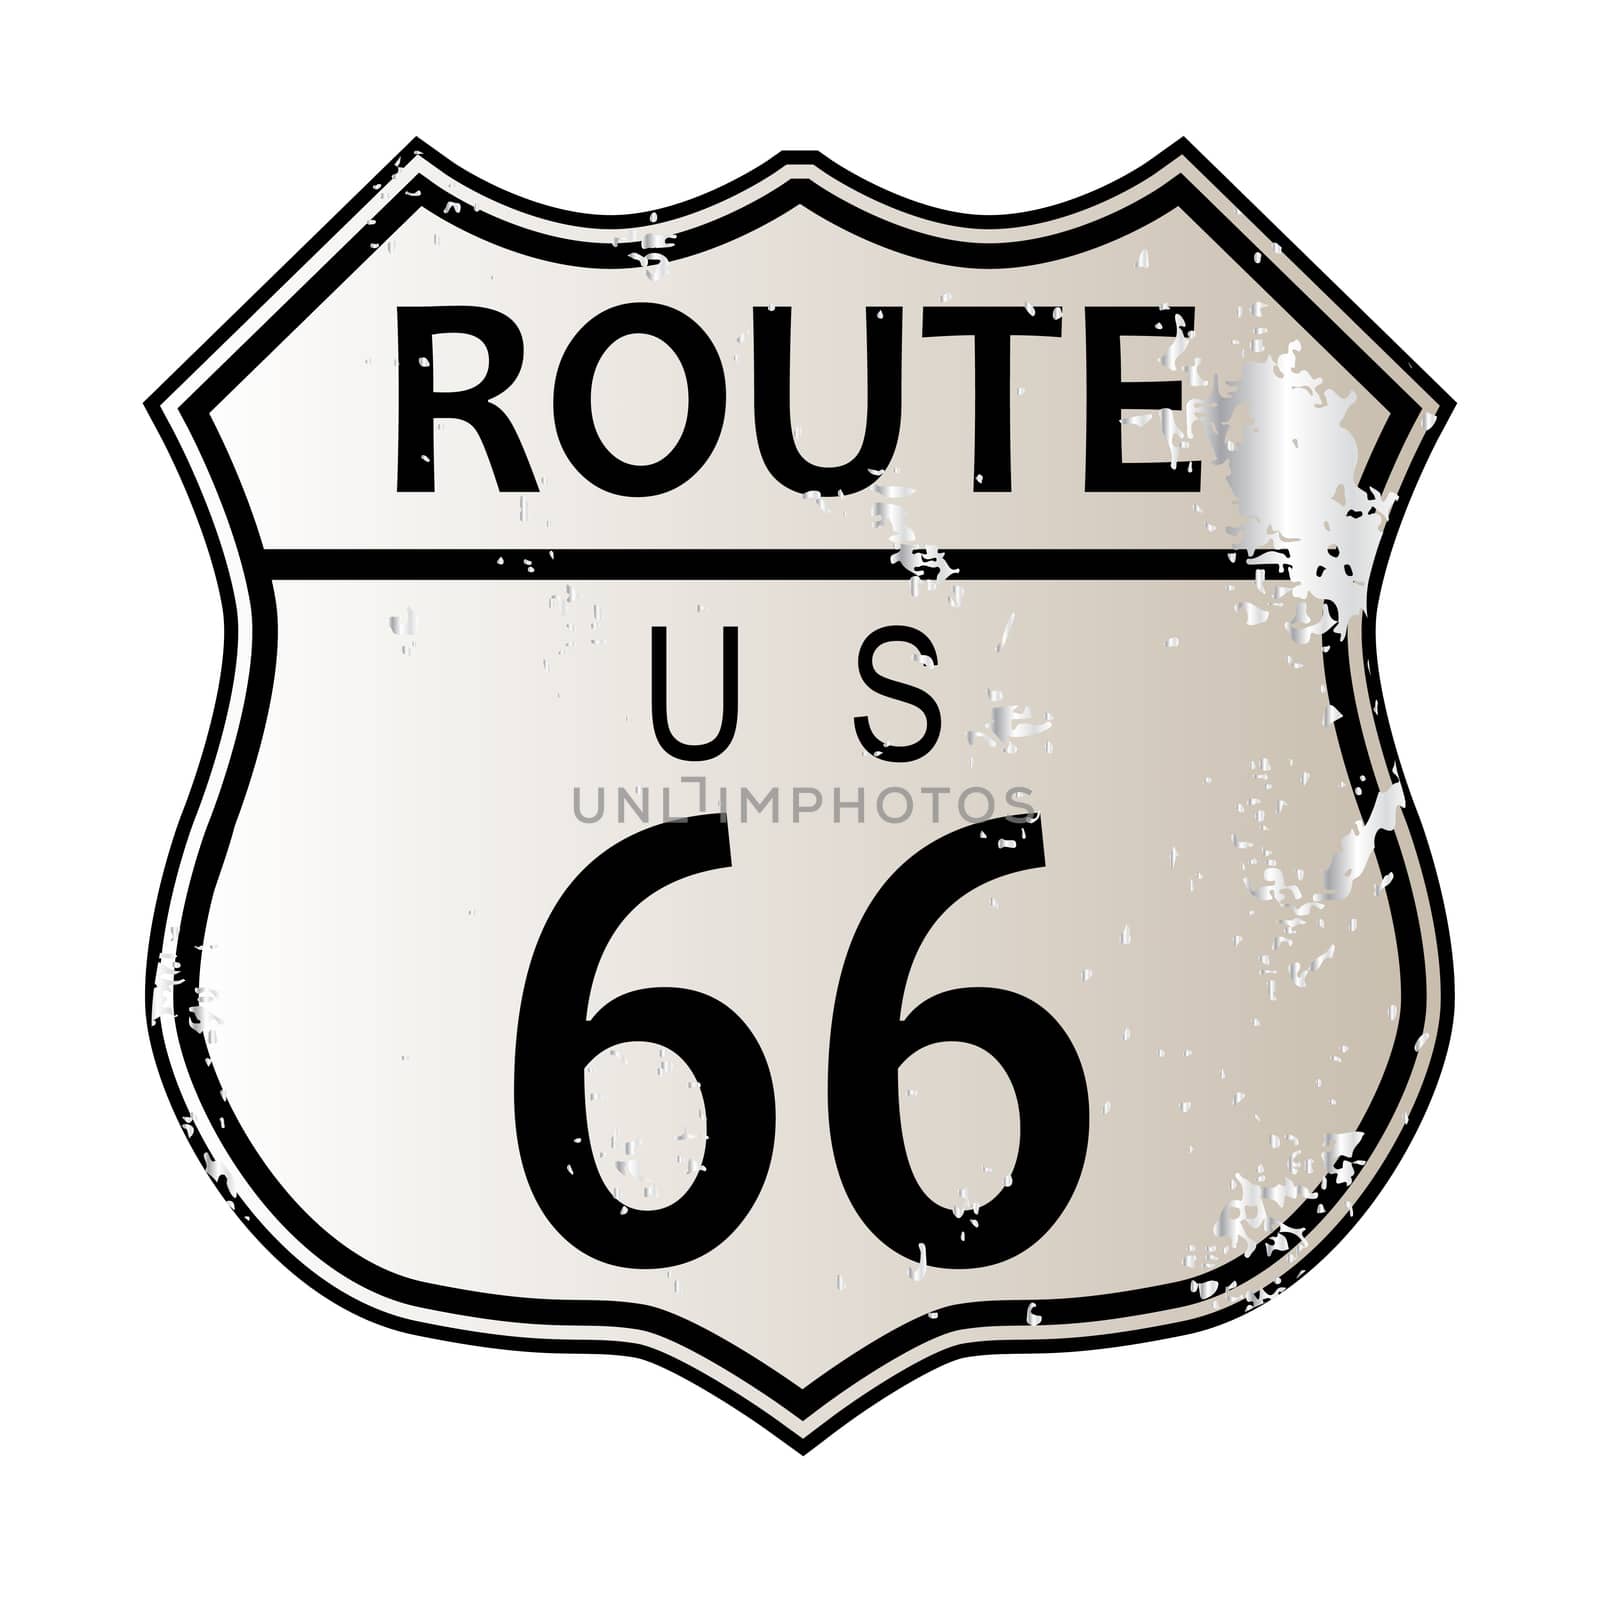 Route 66 traffic sign over a white background and the legend ROUTE US 66